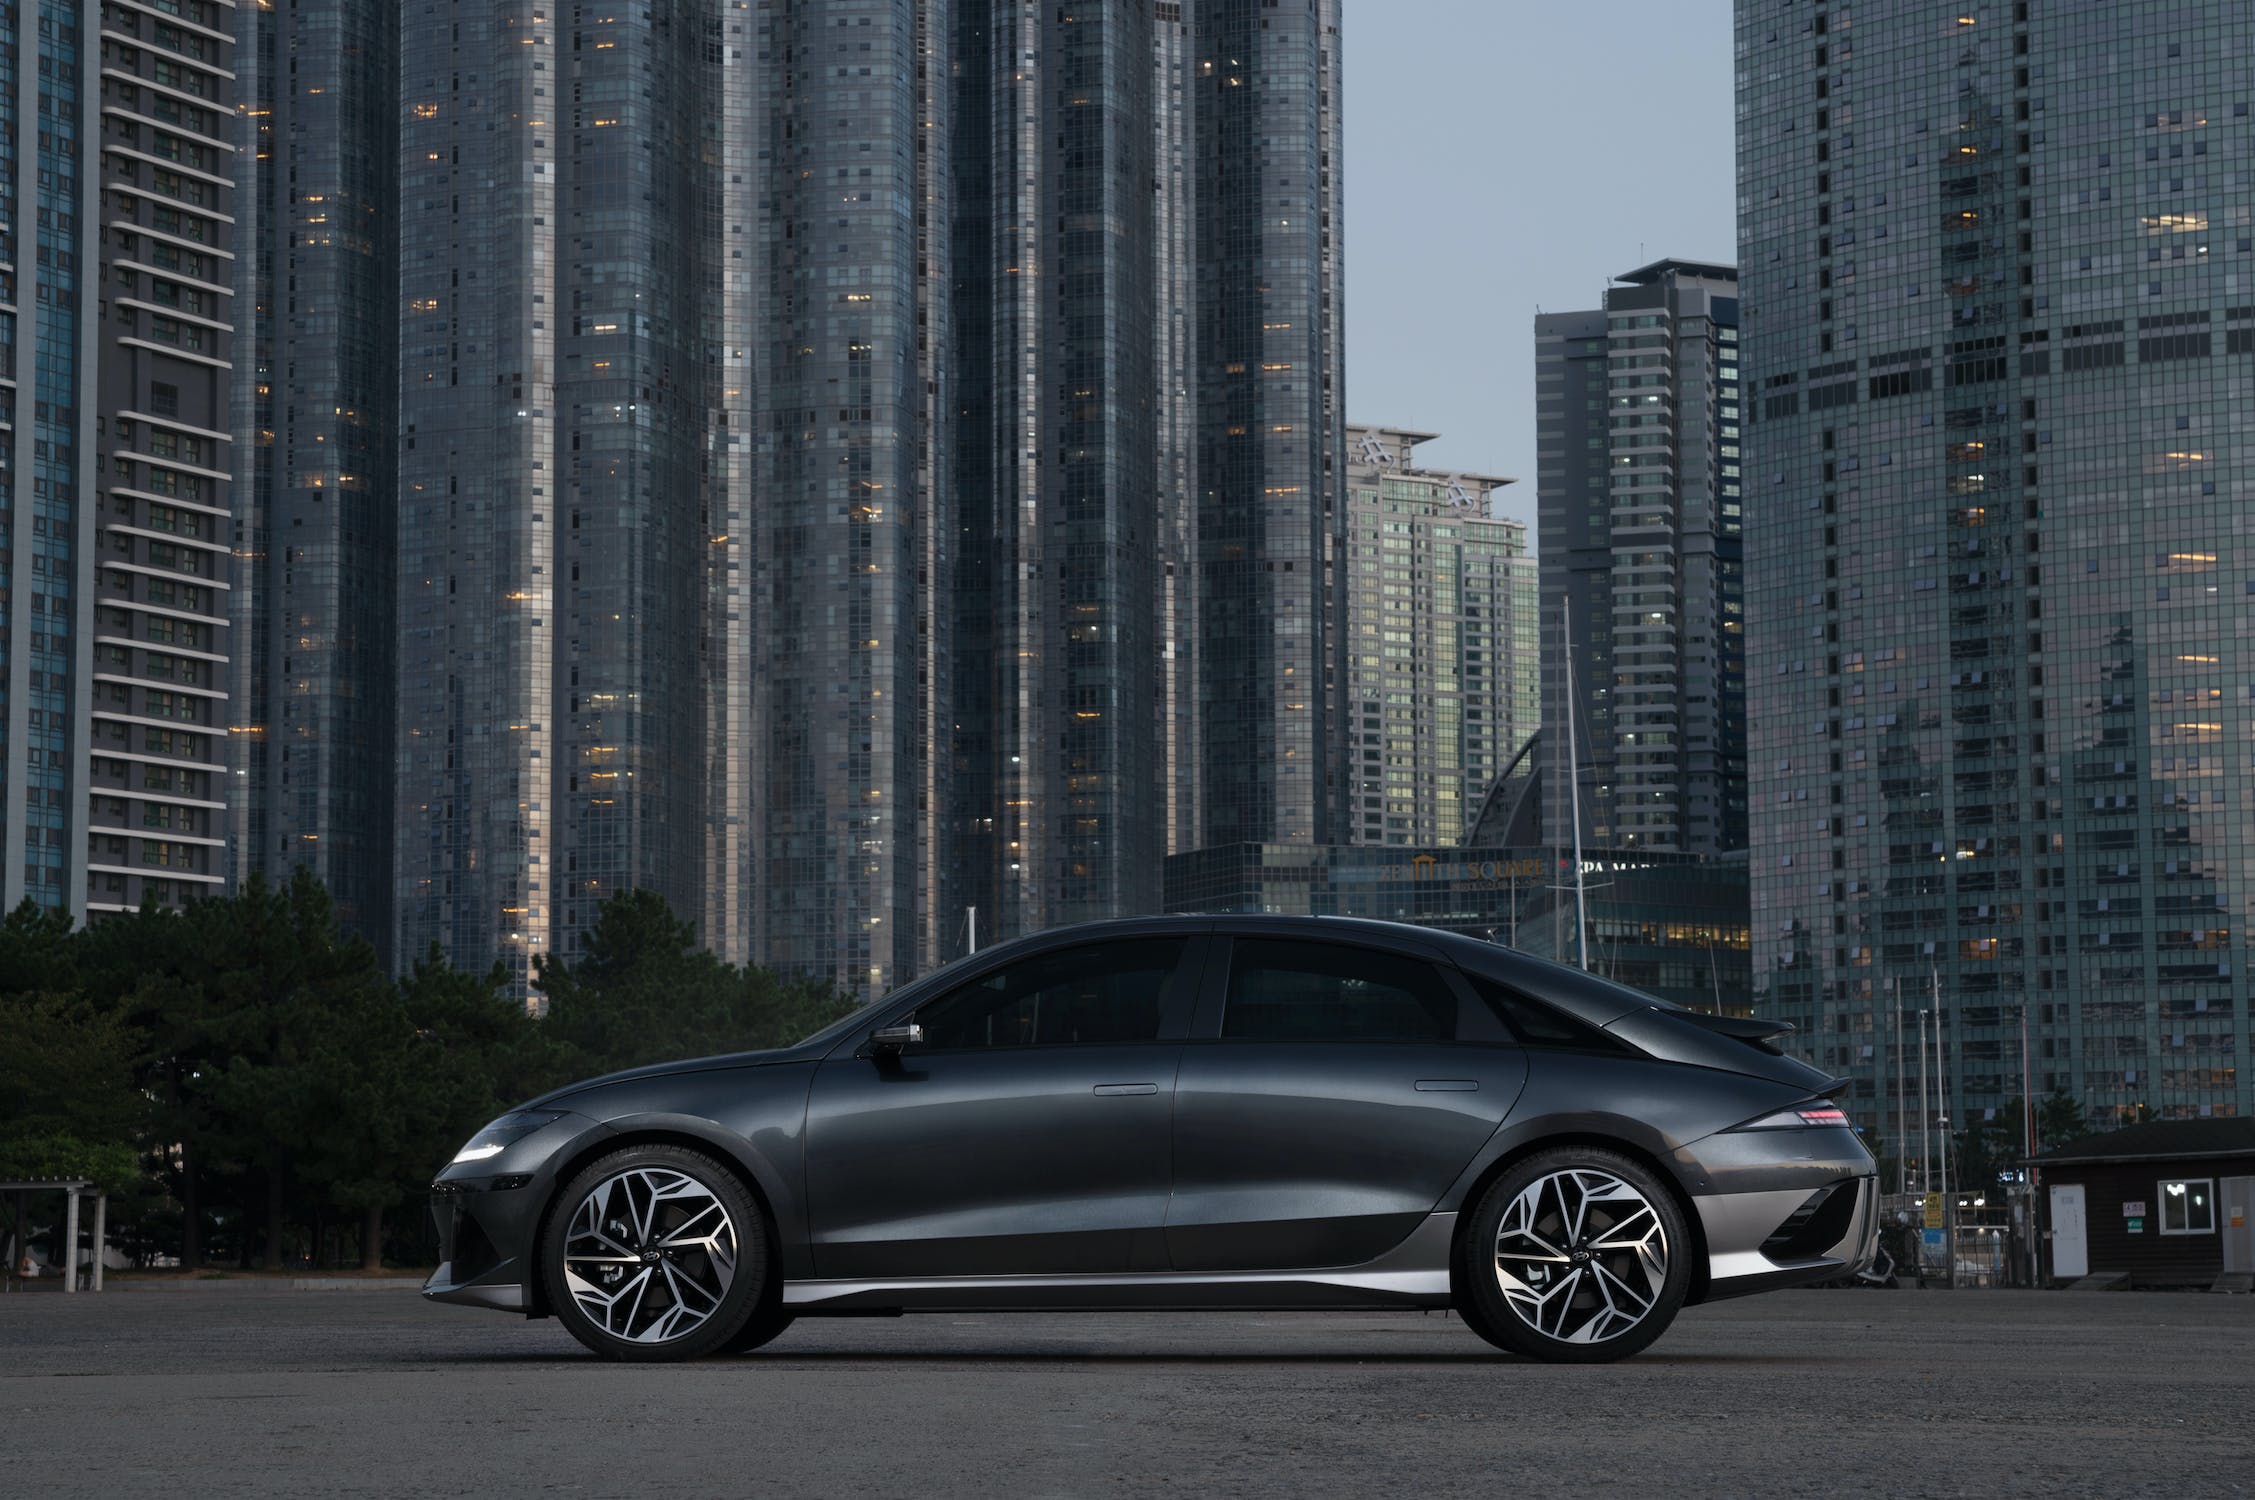 Black IONIQ EV parked in front of a city skyline